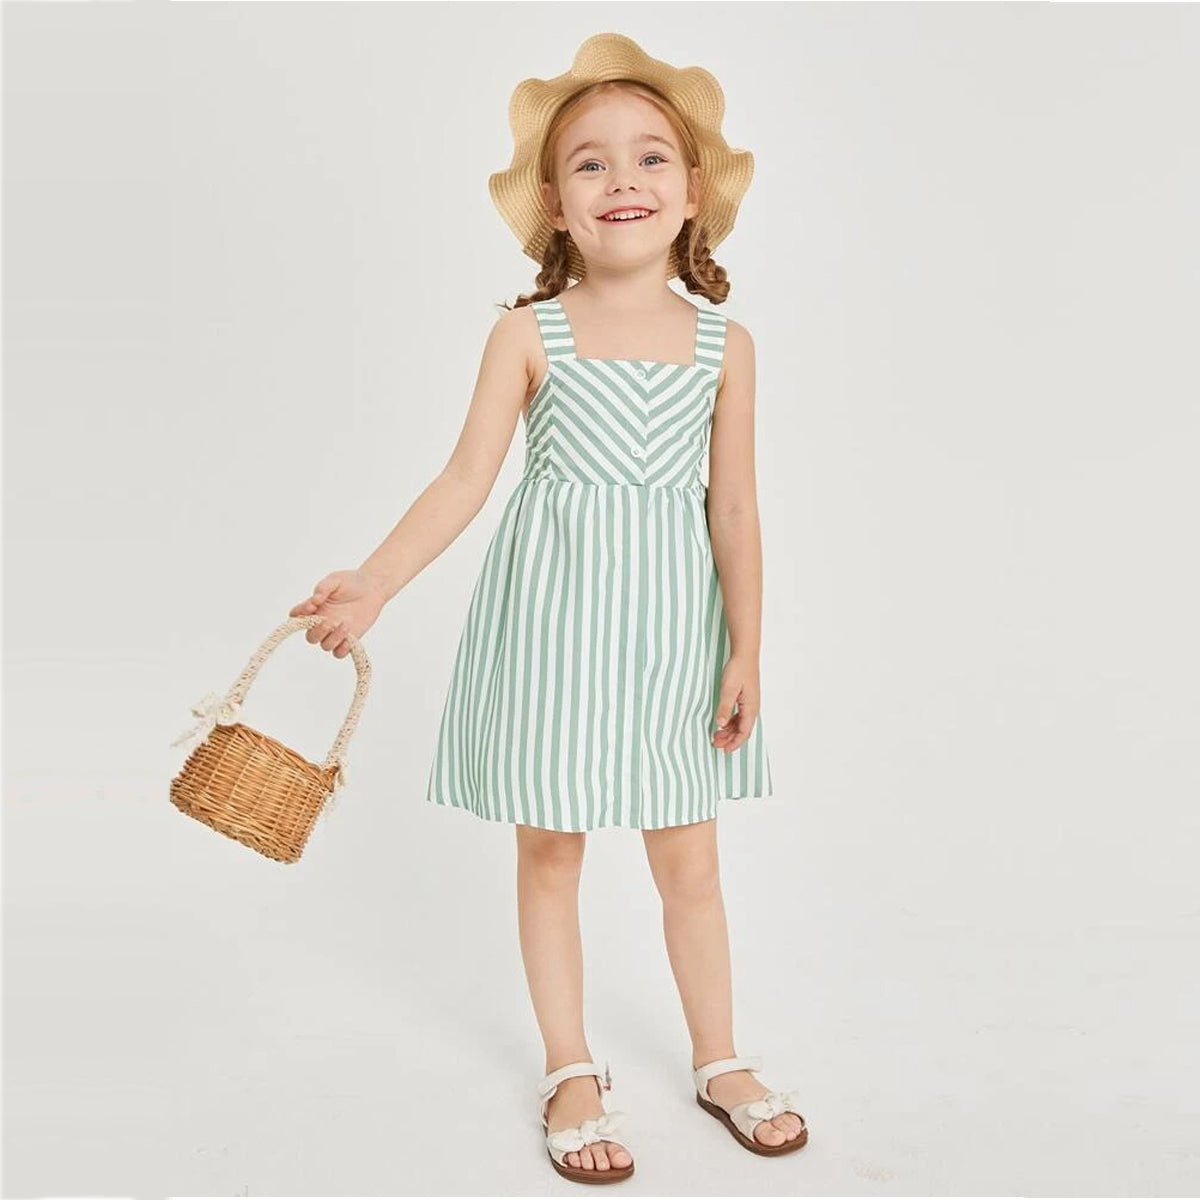 BabyGirl's Cotton Green Striped Cami Frocks & Dresses for Kids.